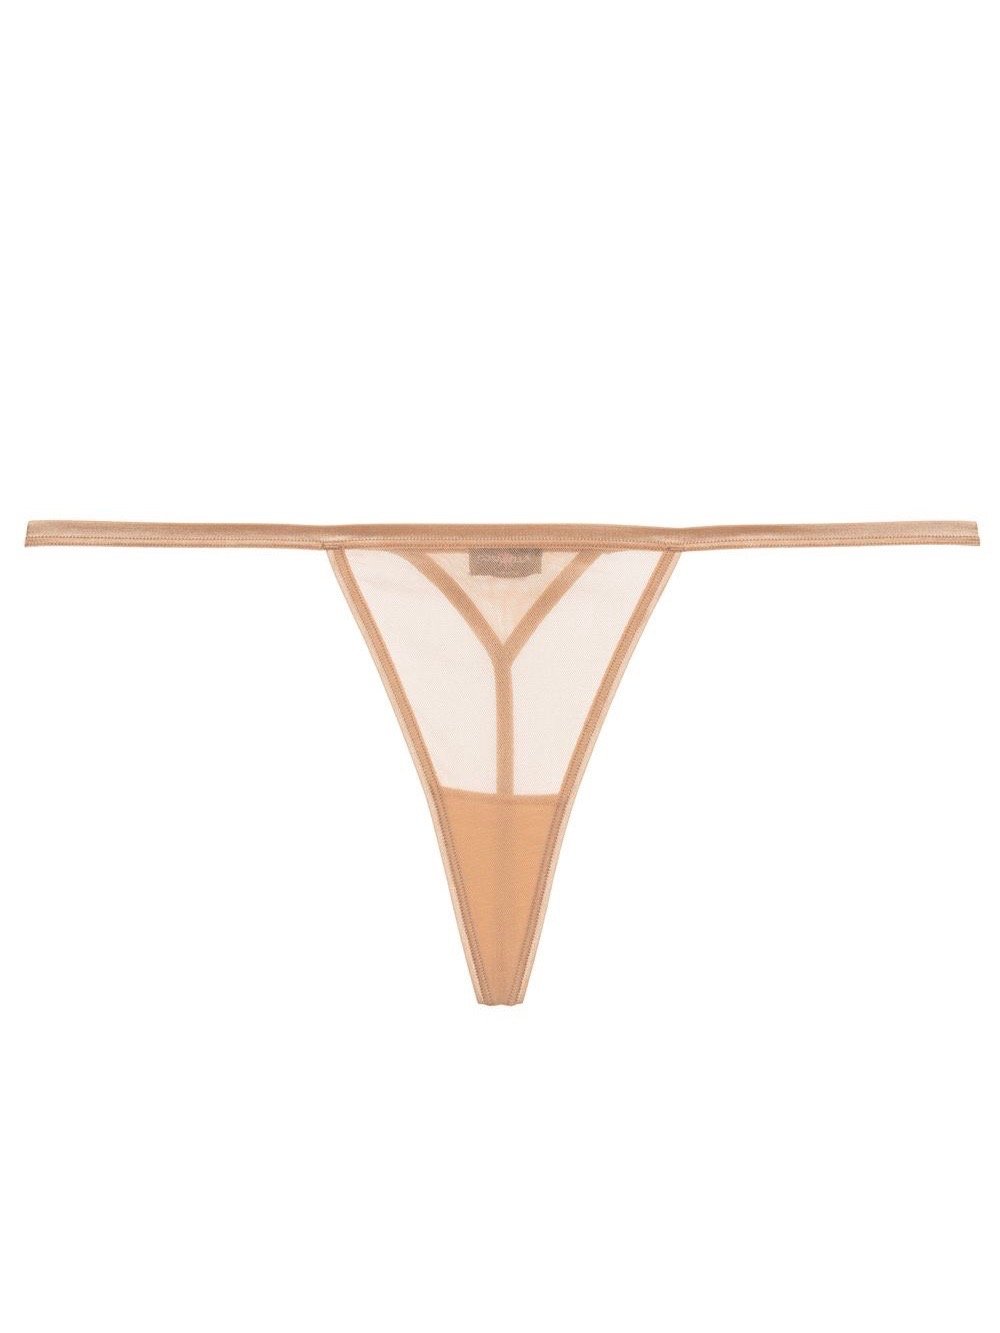 Cosabella G-STRINGS O/S (ONE SIZE) / SEI Cosabella CONFIDENCE Sexy G Strings Panties